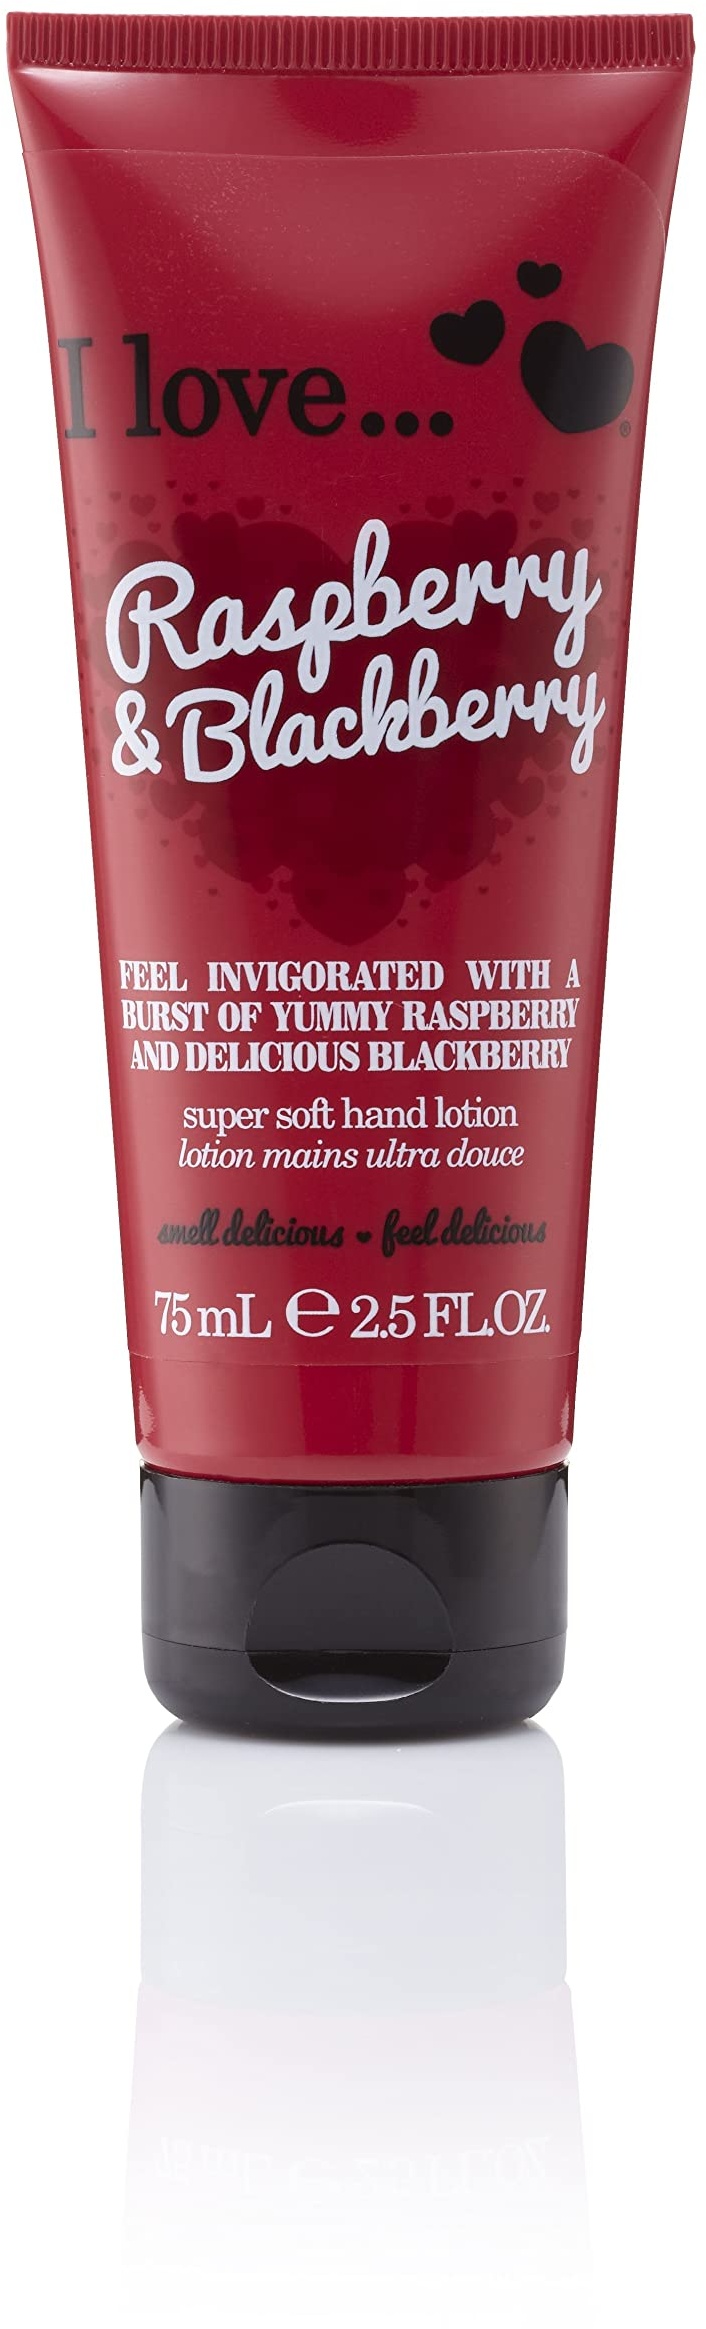 I Love Raspberry & Blackberry Hand Lotion, Helps to Soothe Skin & Relieves Dry Hands, Made With 87% Naturally Derived Ingredients For Soft & Scented Hands, Travel-Size Providing On-The-Go Moisture, Vegan-Friendly - 75ml